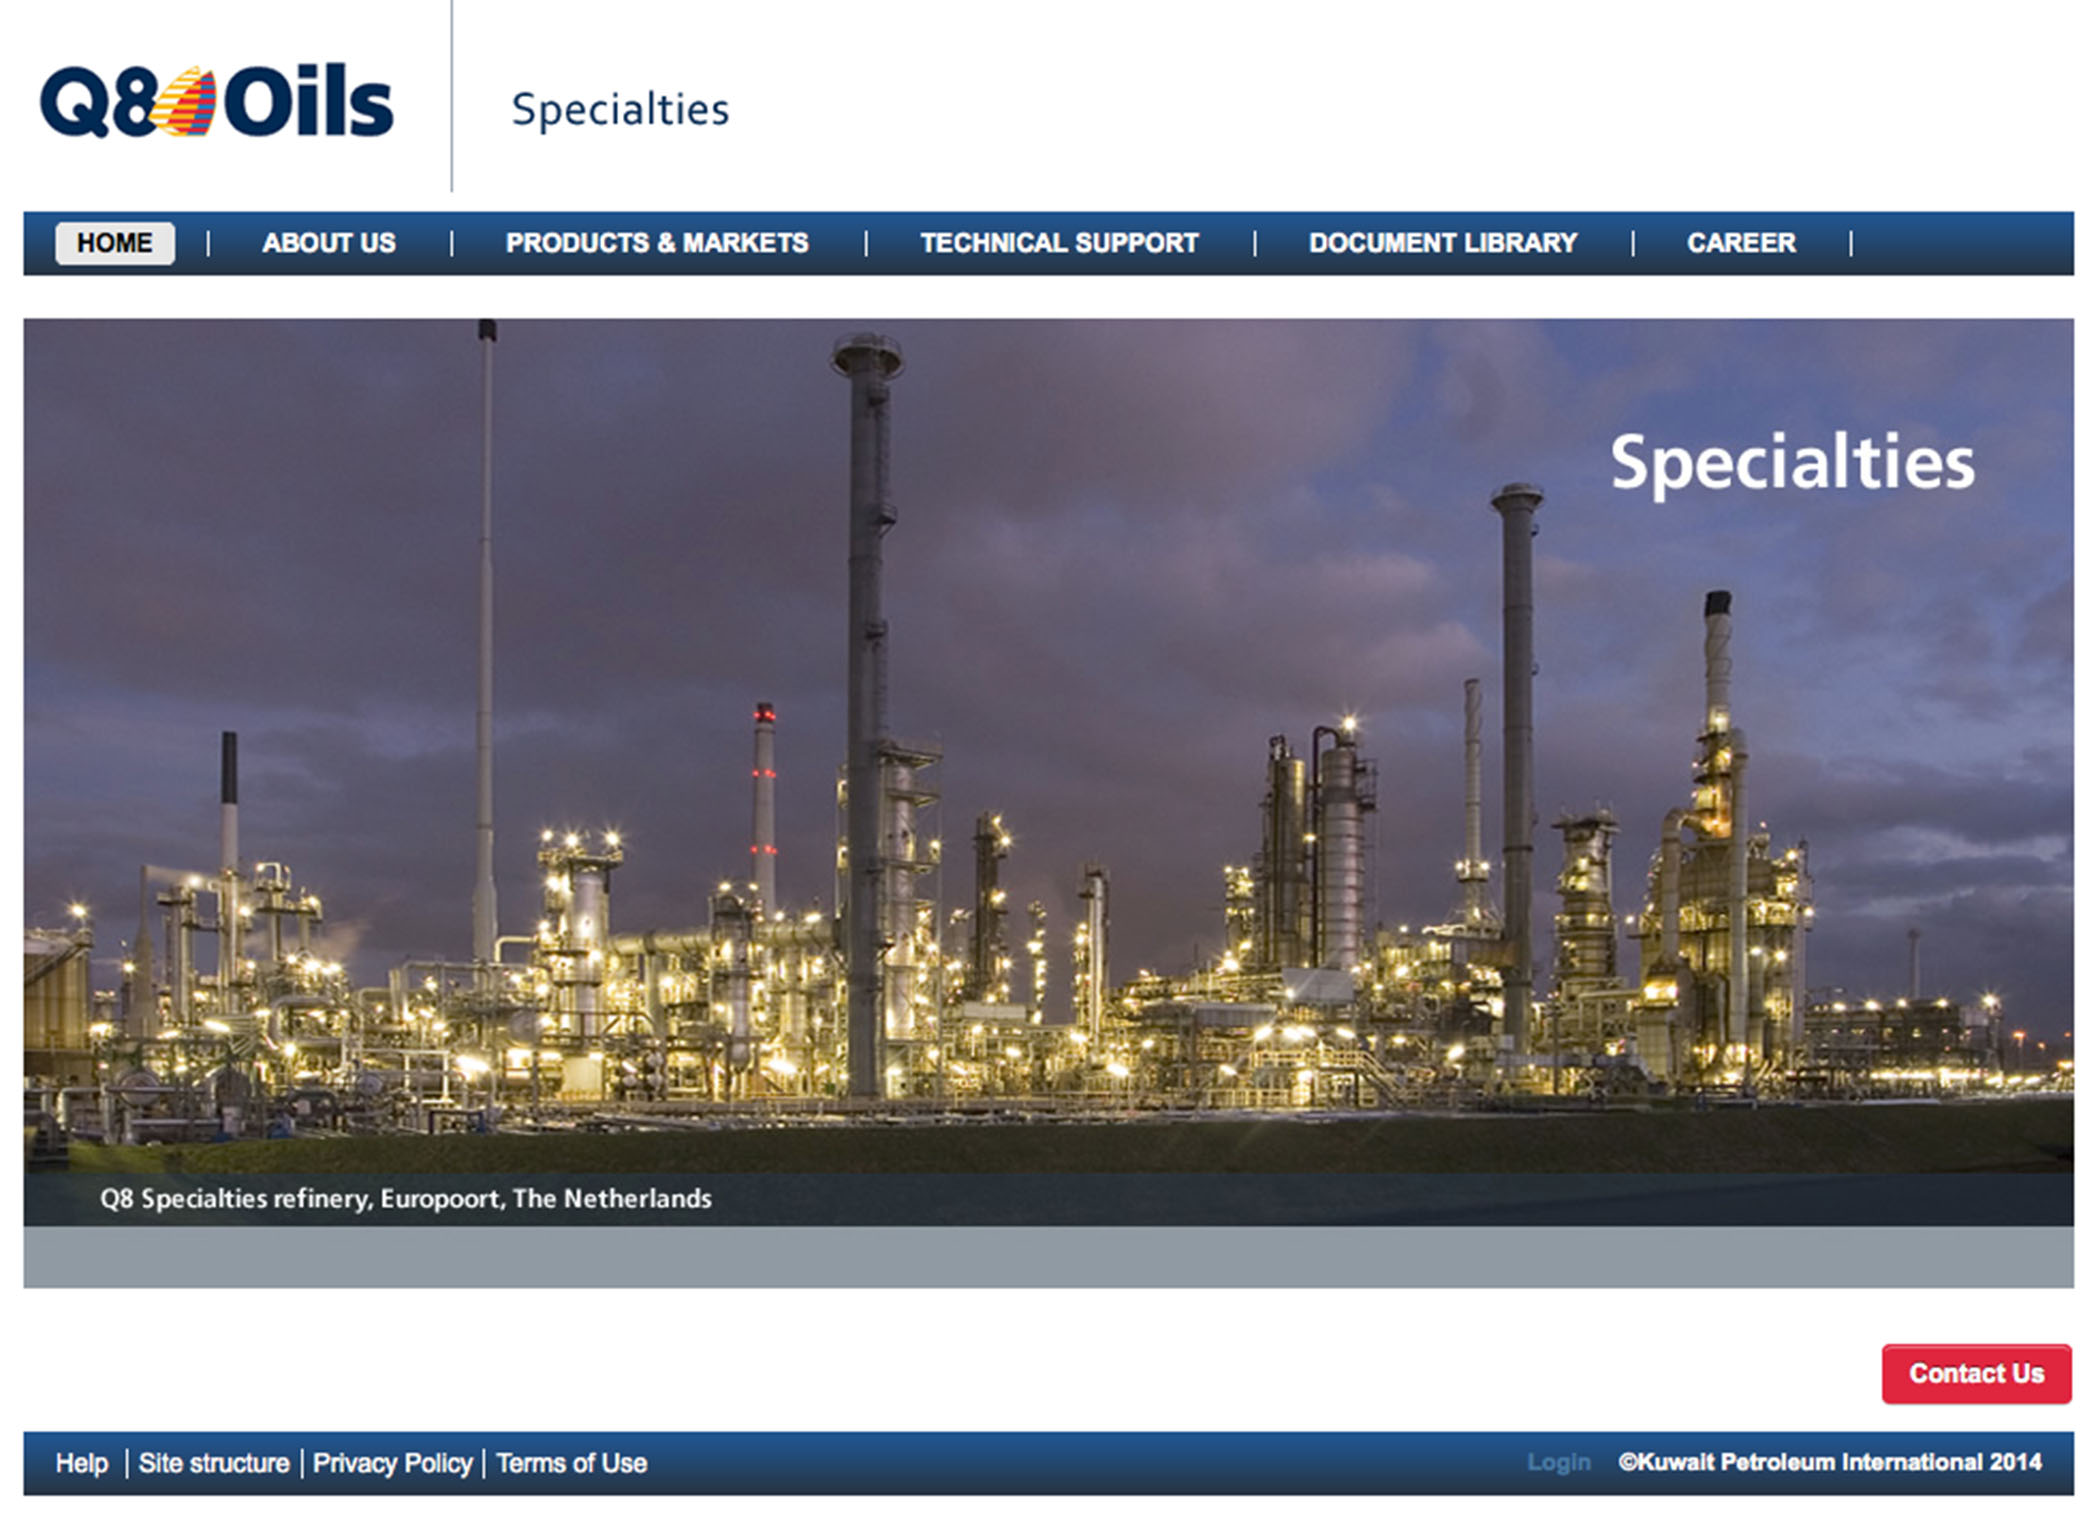 Q8Oils has published a new website for its Q8 Specialties division